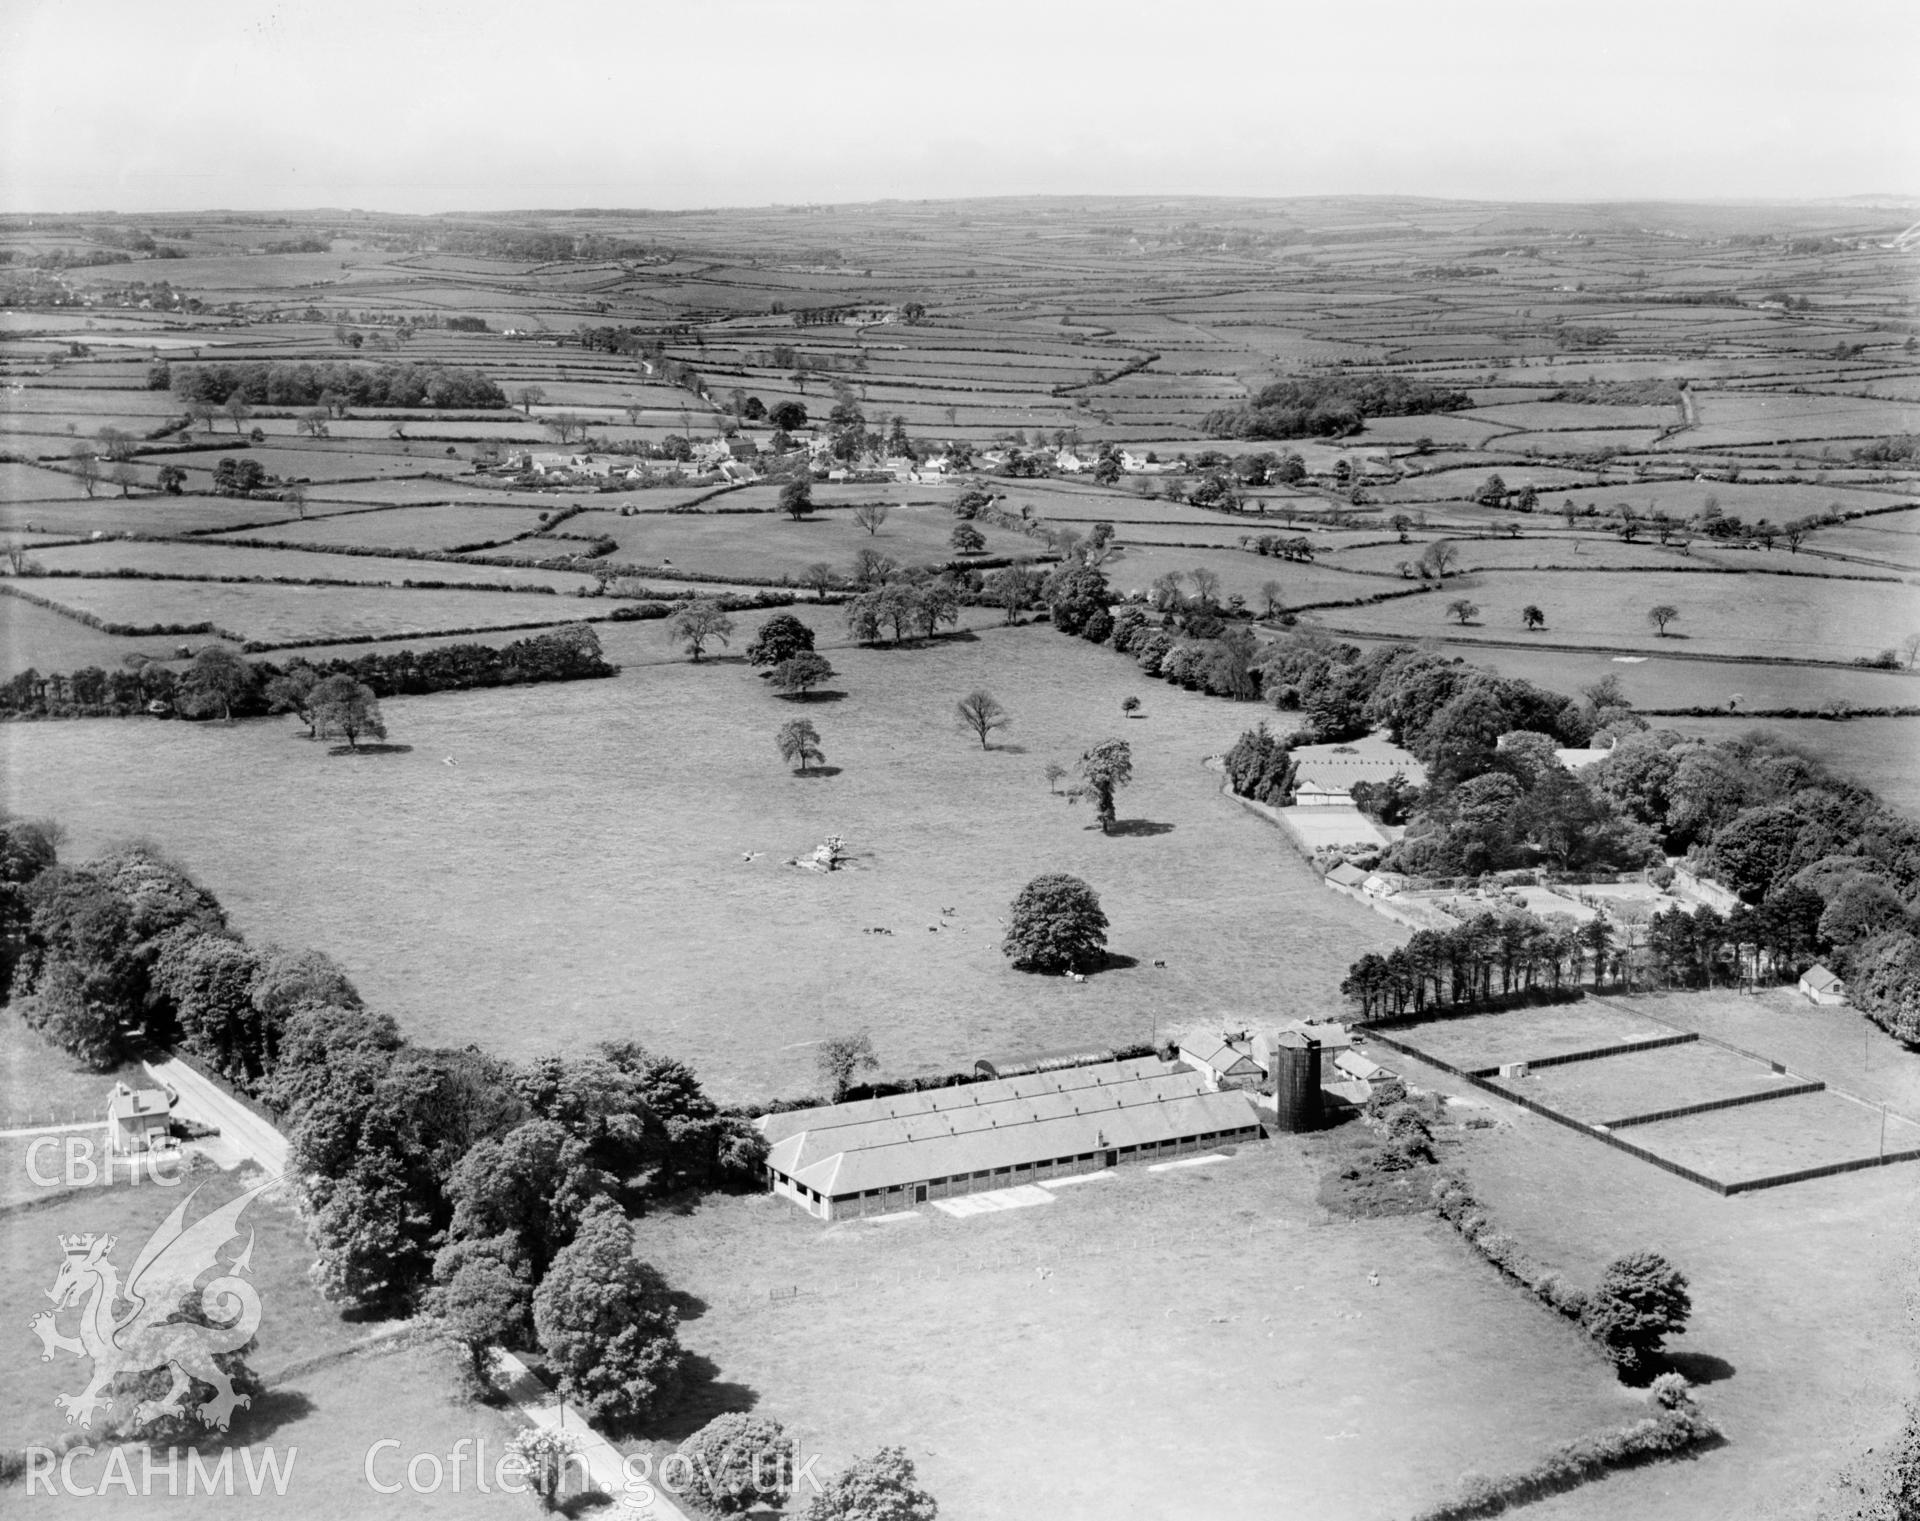 View of Prince of Wales Hospital, Cowbridge, oblique aerial view. 5?x4? black and white glass plate negative.